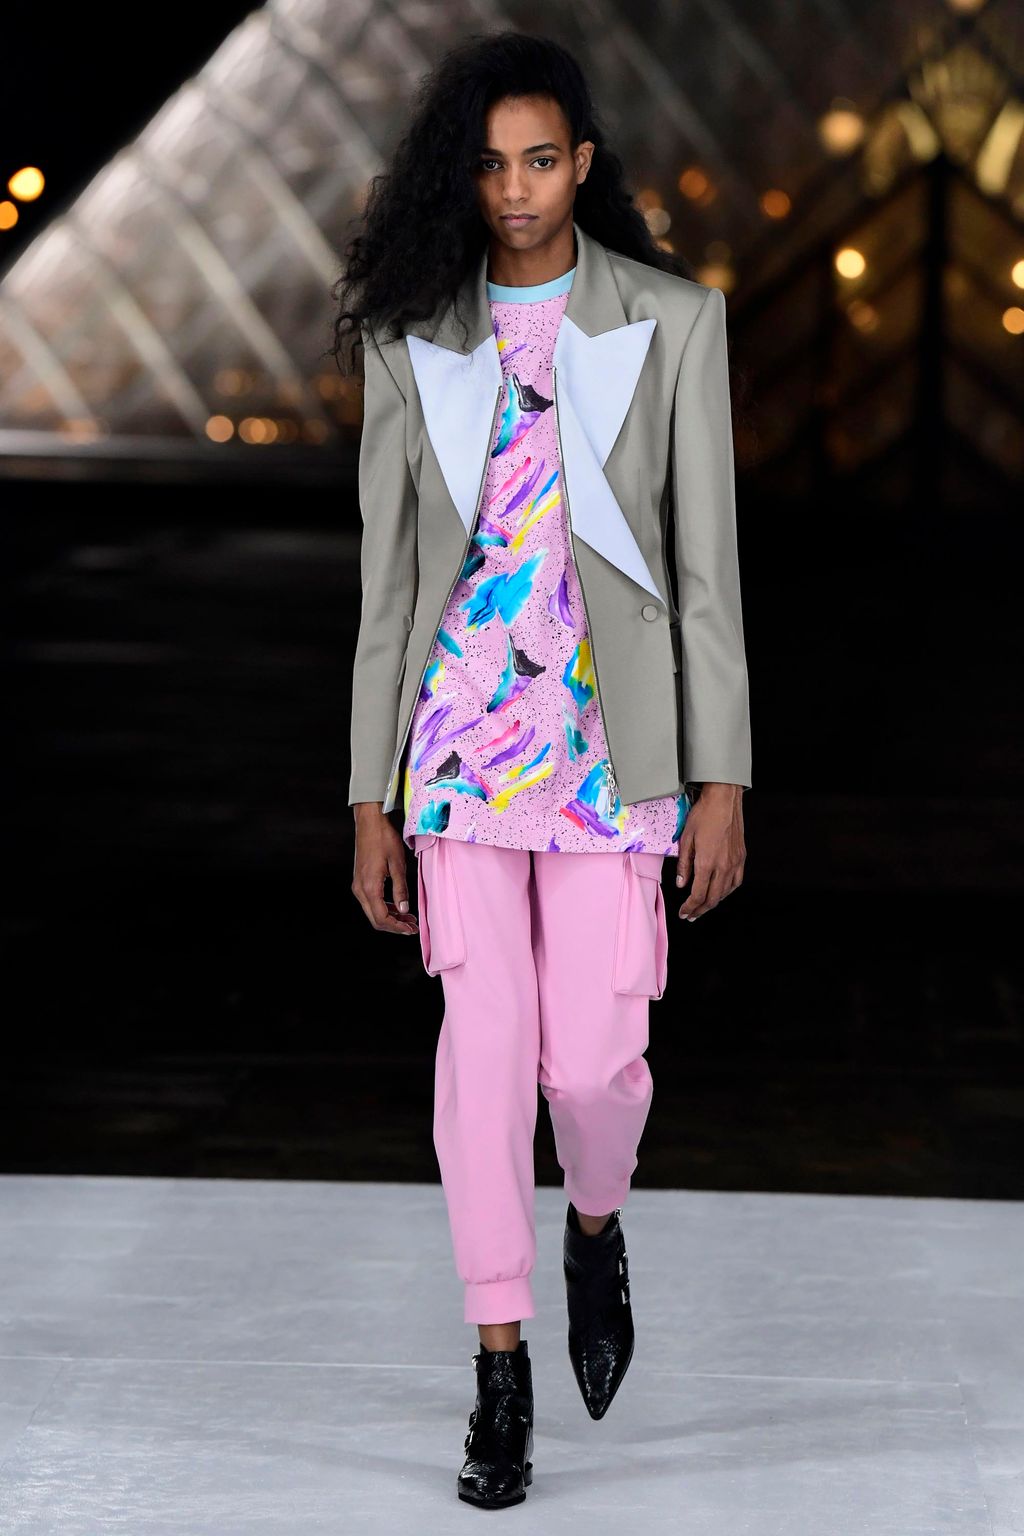 Carmen Amare walks on the runway during the Louis Vuitton Resort